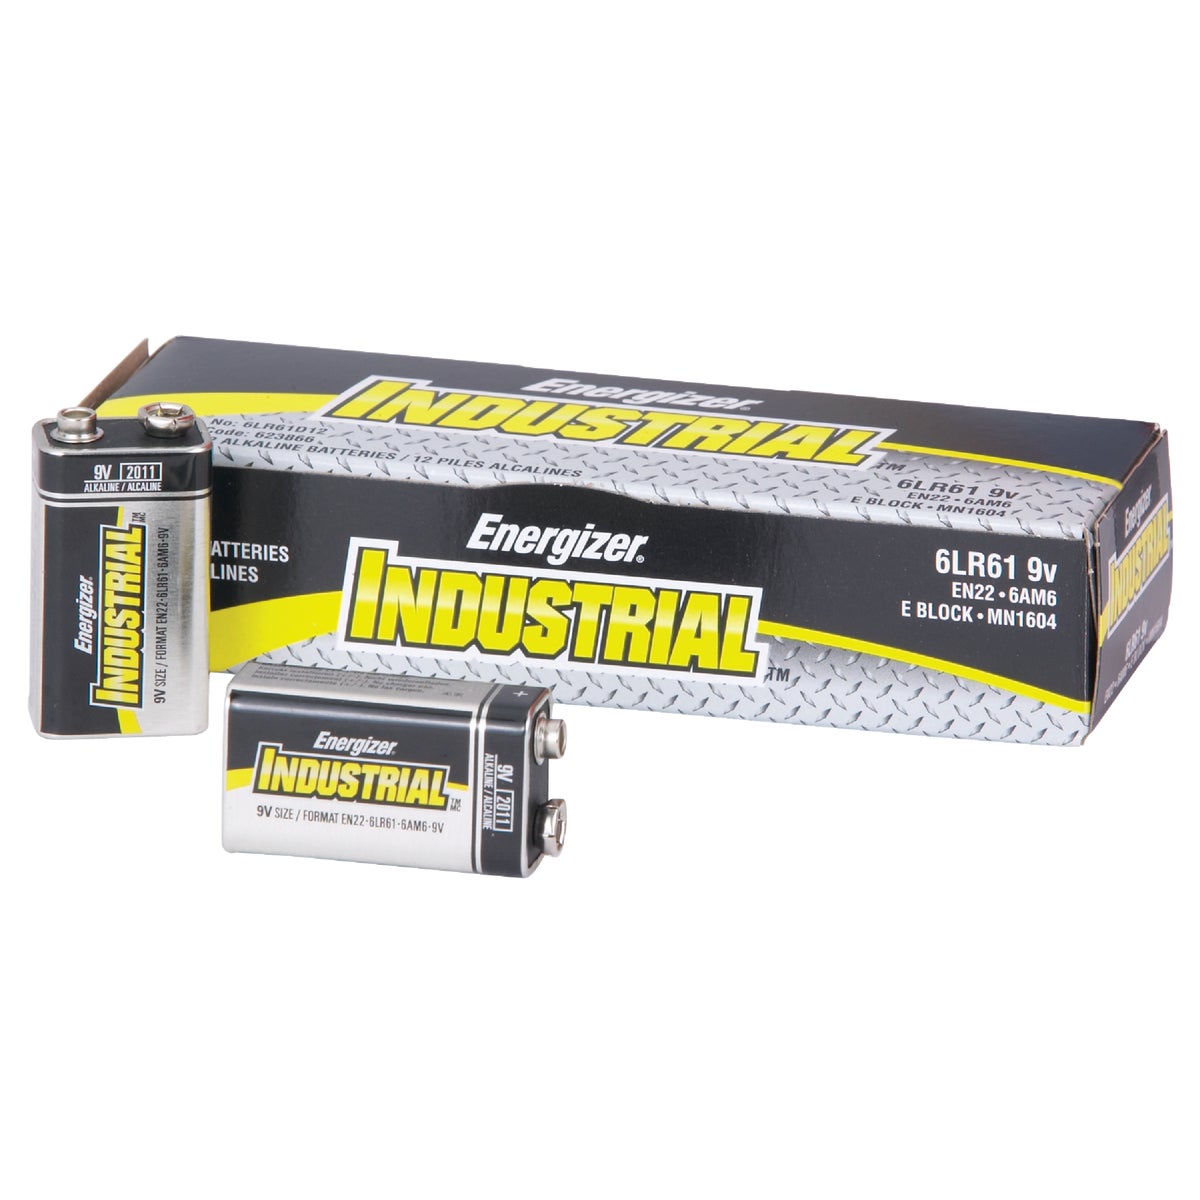 Item 825247, Industrial strength batteries featuring zinc-manganese dioxide chemistry.